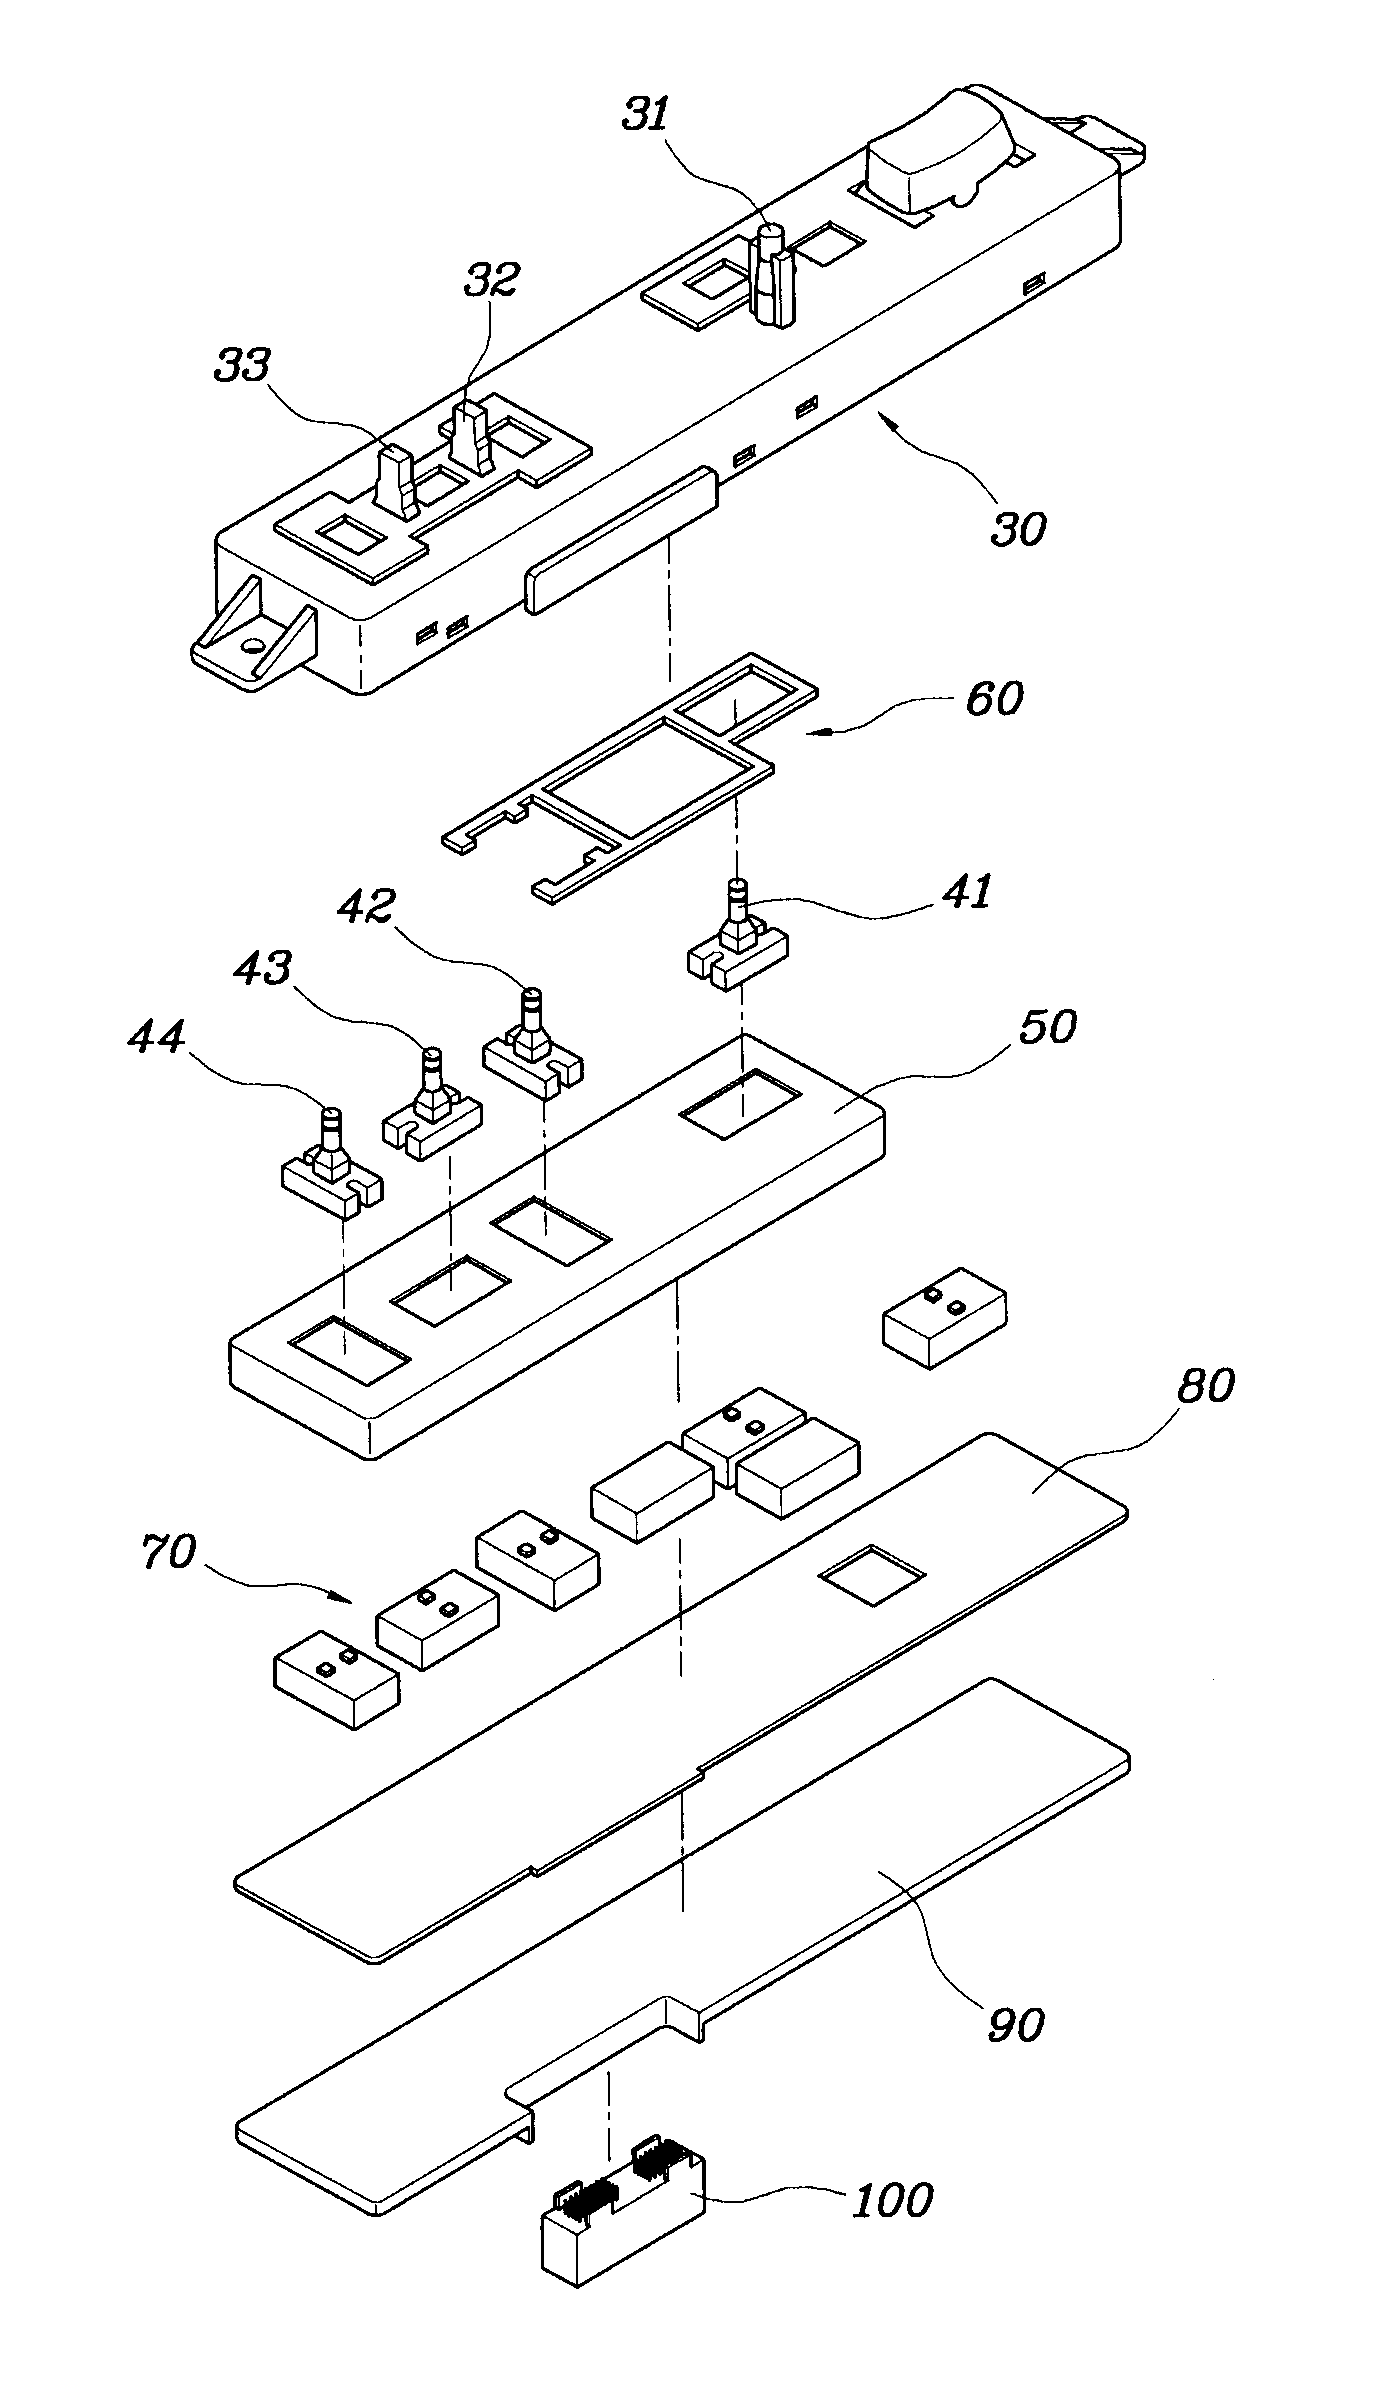 Switch apparatus for adjusting power seat in vehicle